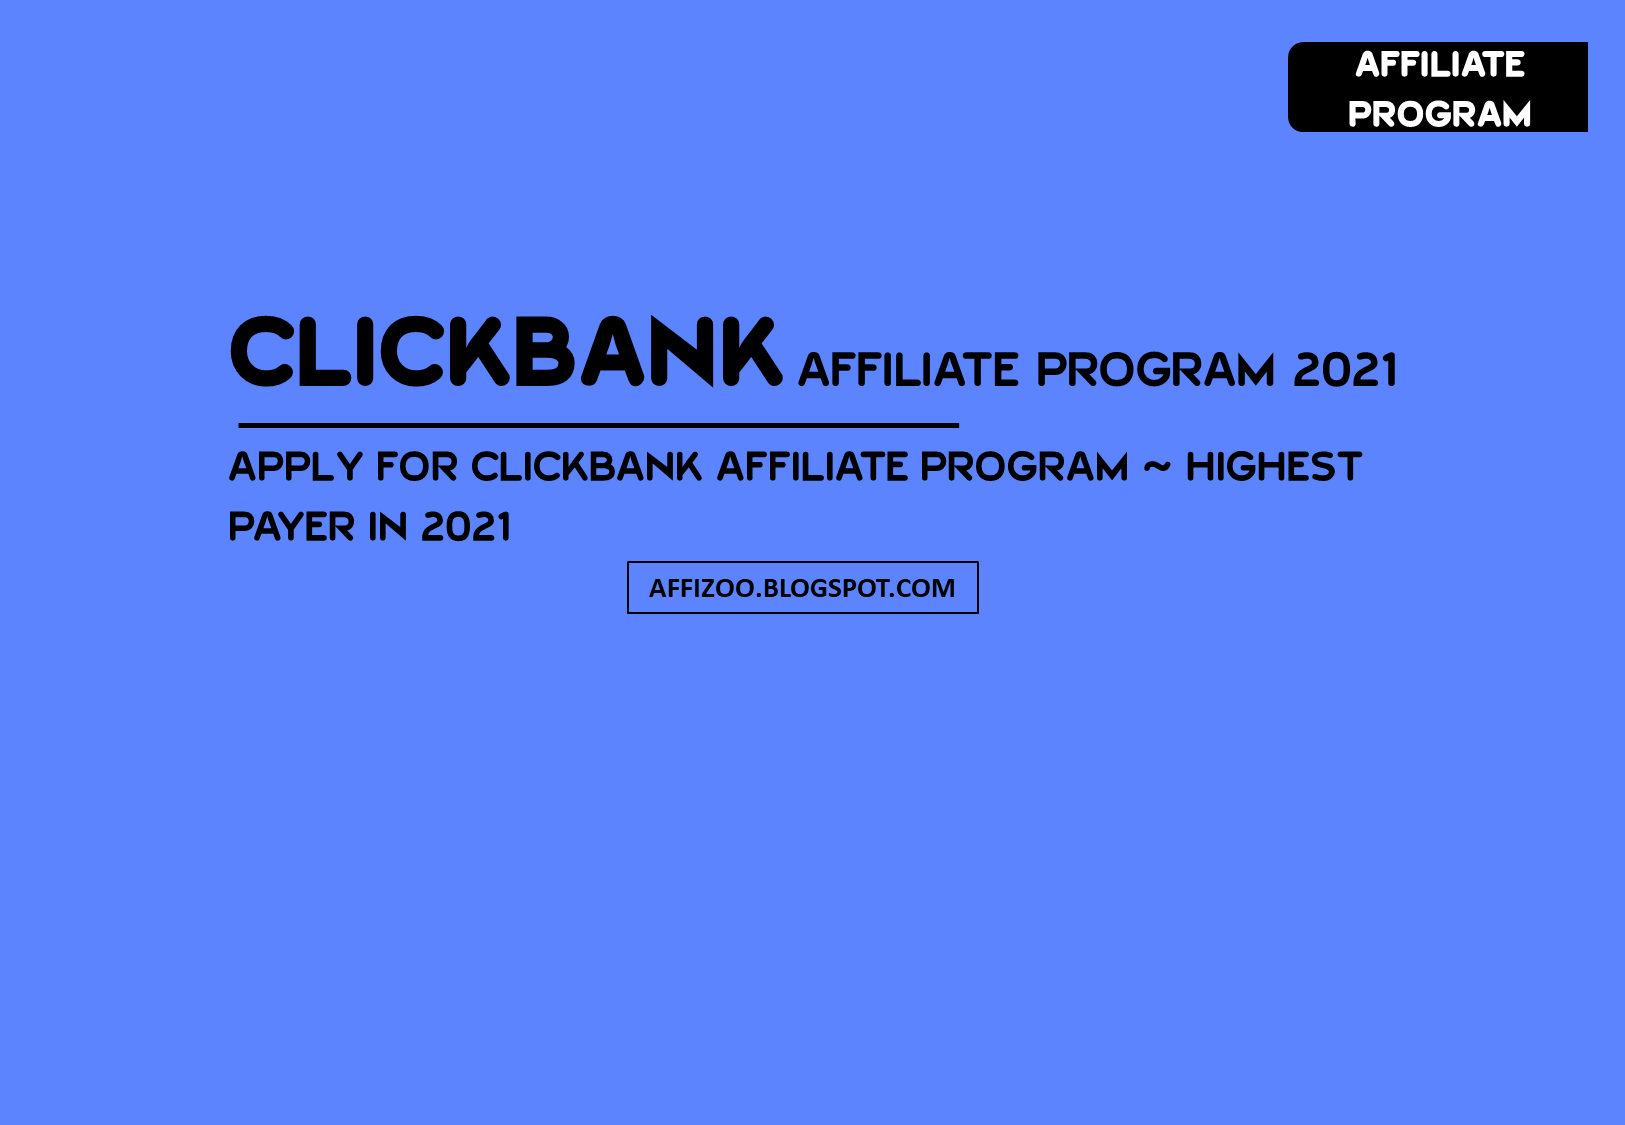 ClickBank Affiliate Program 2021: How To Make Money With ClickBank In 2021 [Upto $400/Day]